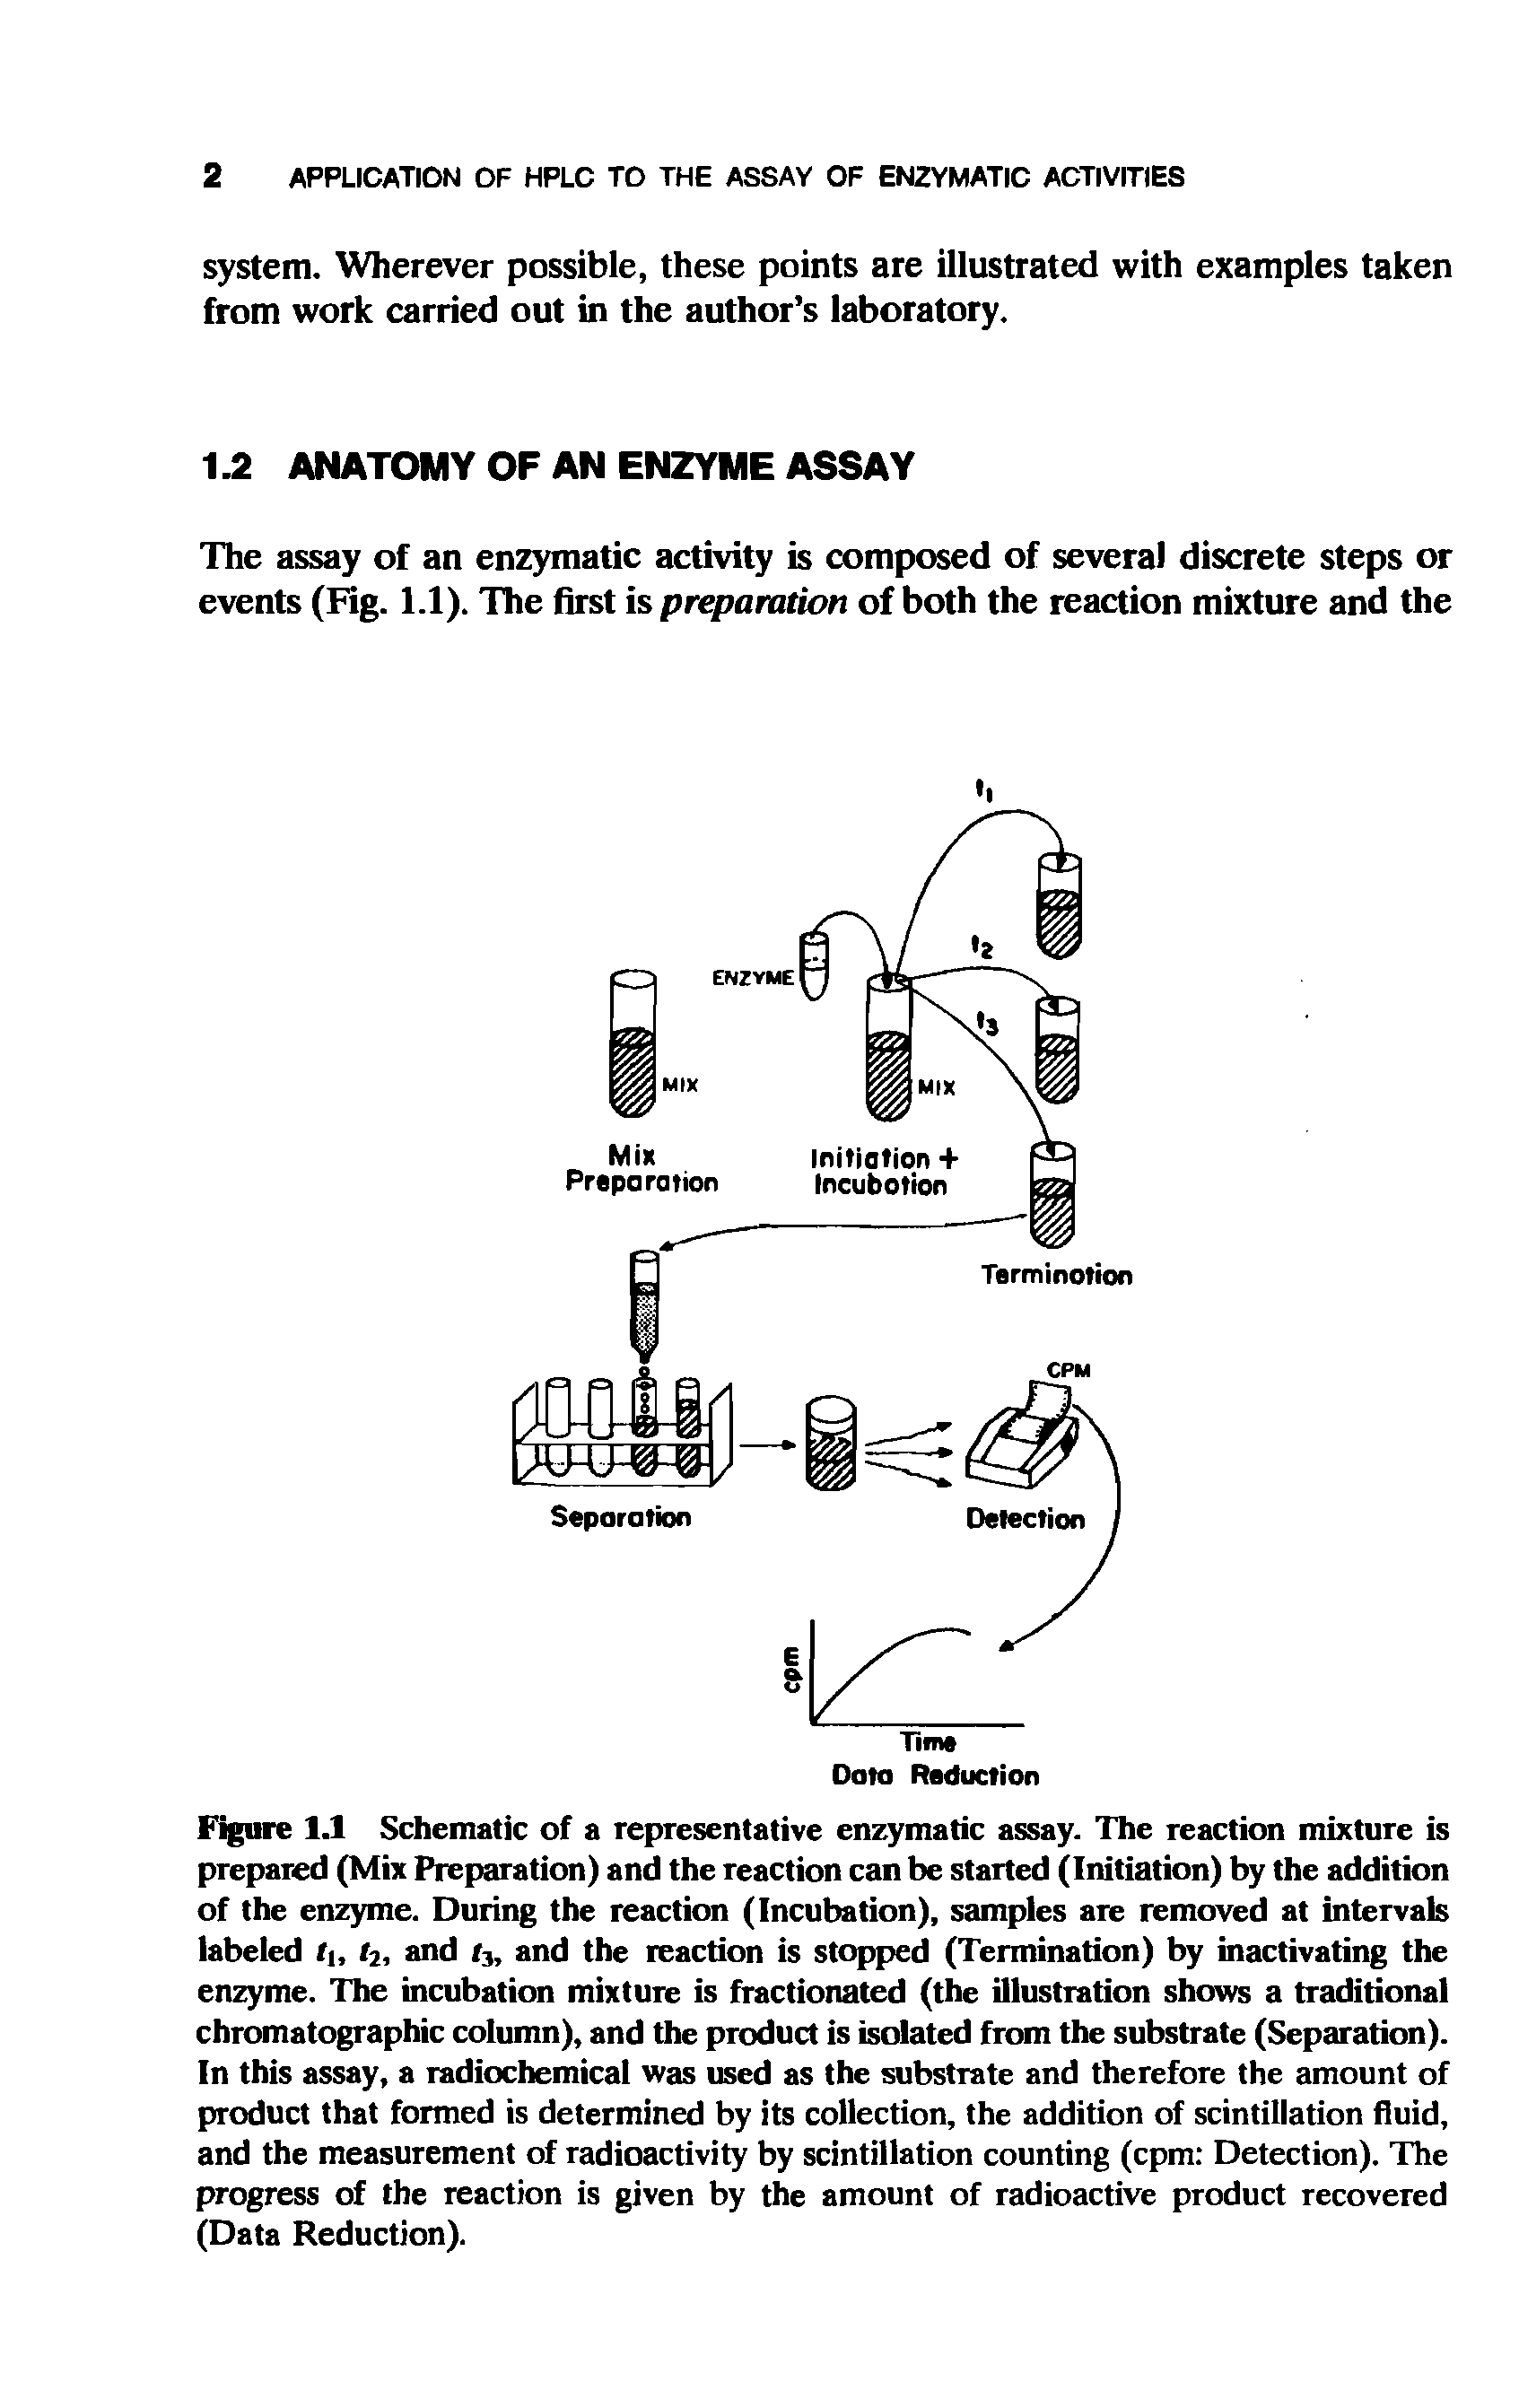 Figure 1.1 Schematic of a representative enzymatic assay. The reaction mixture is prepared (Mix Preparation) and the reaction can be started (Initiation) by the addition of the enzyme. During the reaction (Incubation), samples are removed at intervals labeled h, t2, and r3, and the reaction is stopped (Termination) by inactivating the enzyme. The incubation mixture is fractionated (the illustration shows a traditional chromatographic column), and the product is isolated from the substrate (Separation). In this assay, a radiochemical was used as the substrate and therefore the amount of product that formed is determined by its collection, the addition of scintillation fluid, and the measurement of radioactivity by scintillation counting (cpm Detection). The progress of the reaction is given by the amount of radioactive product recovered (Data Reduction).